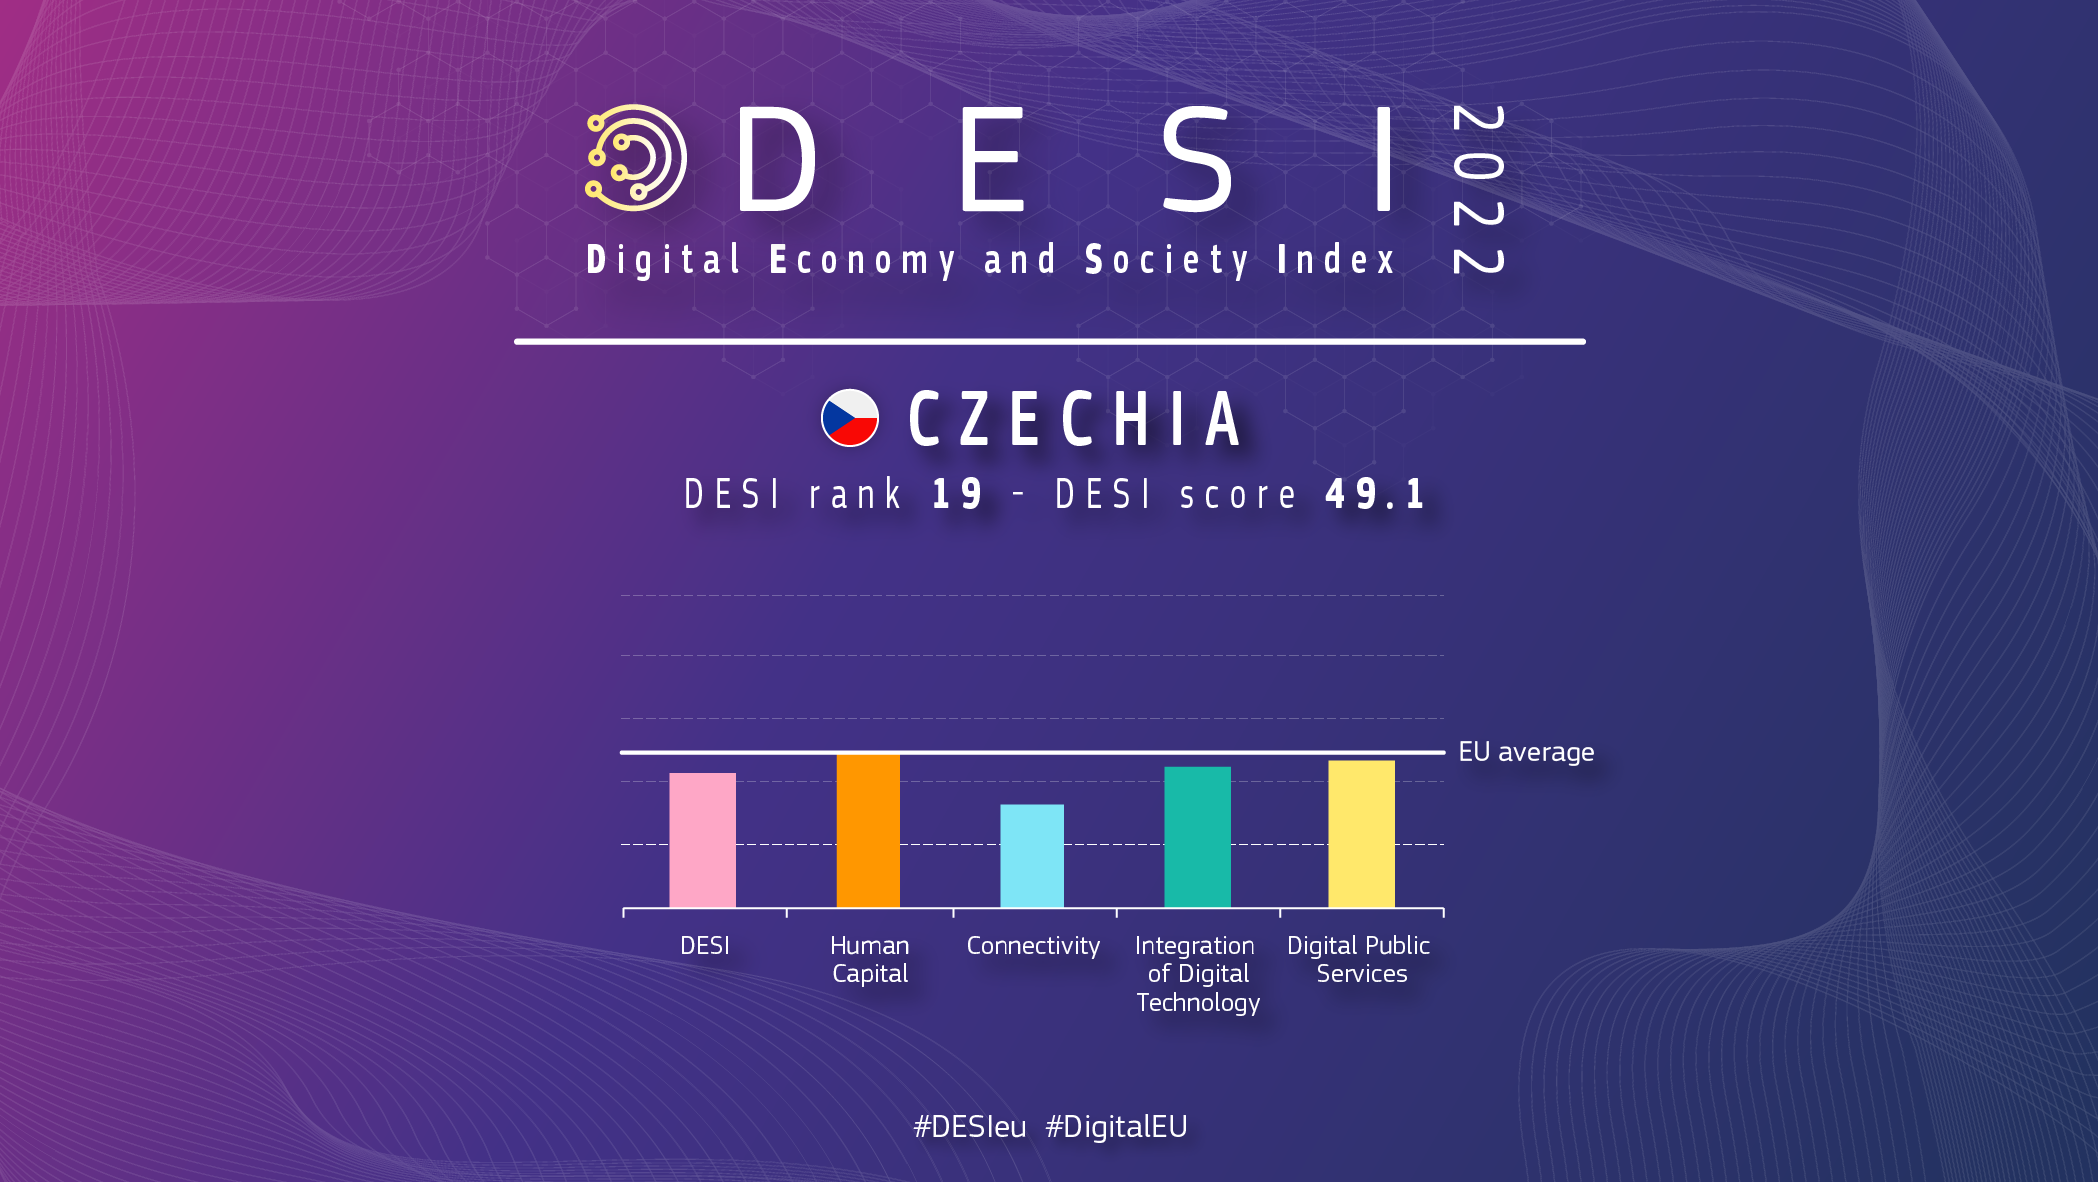 Graphic overview of Czech Republic in DESI showing a ranking of 19 and a score of 49.1